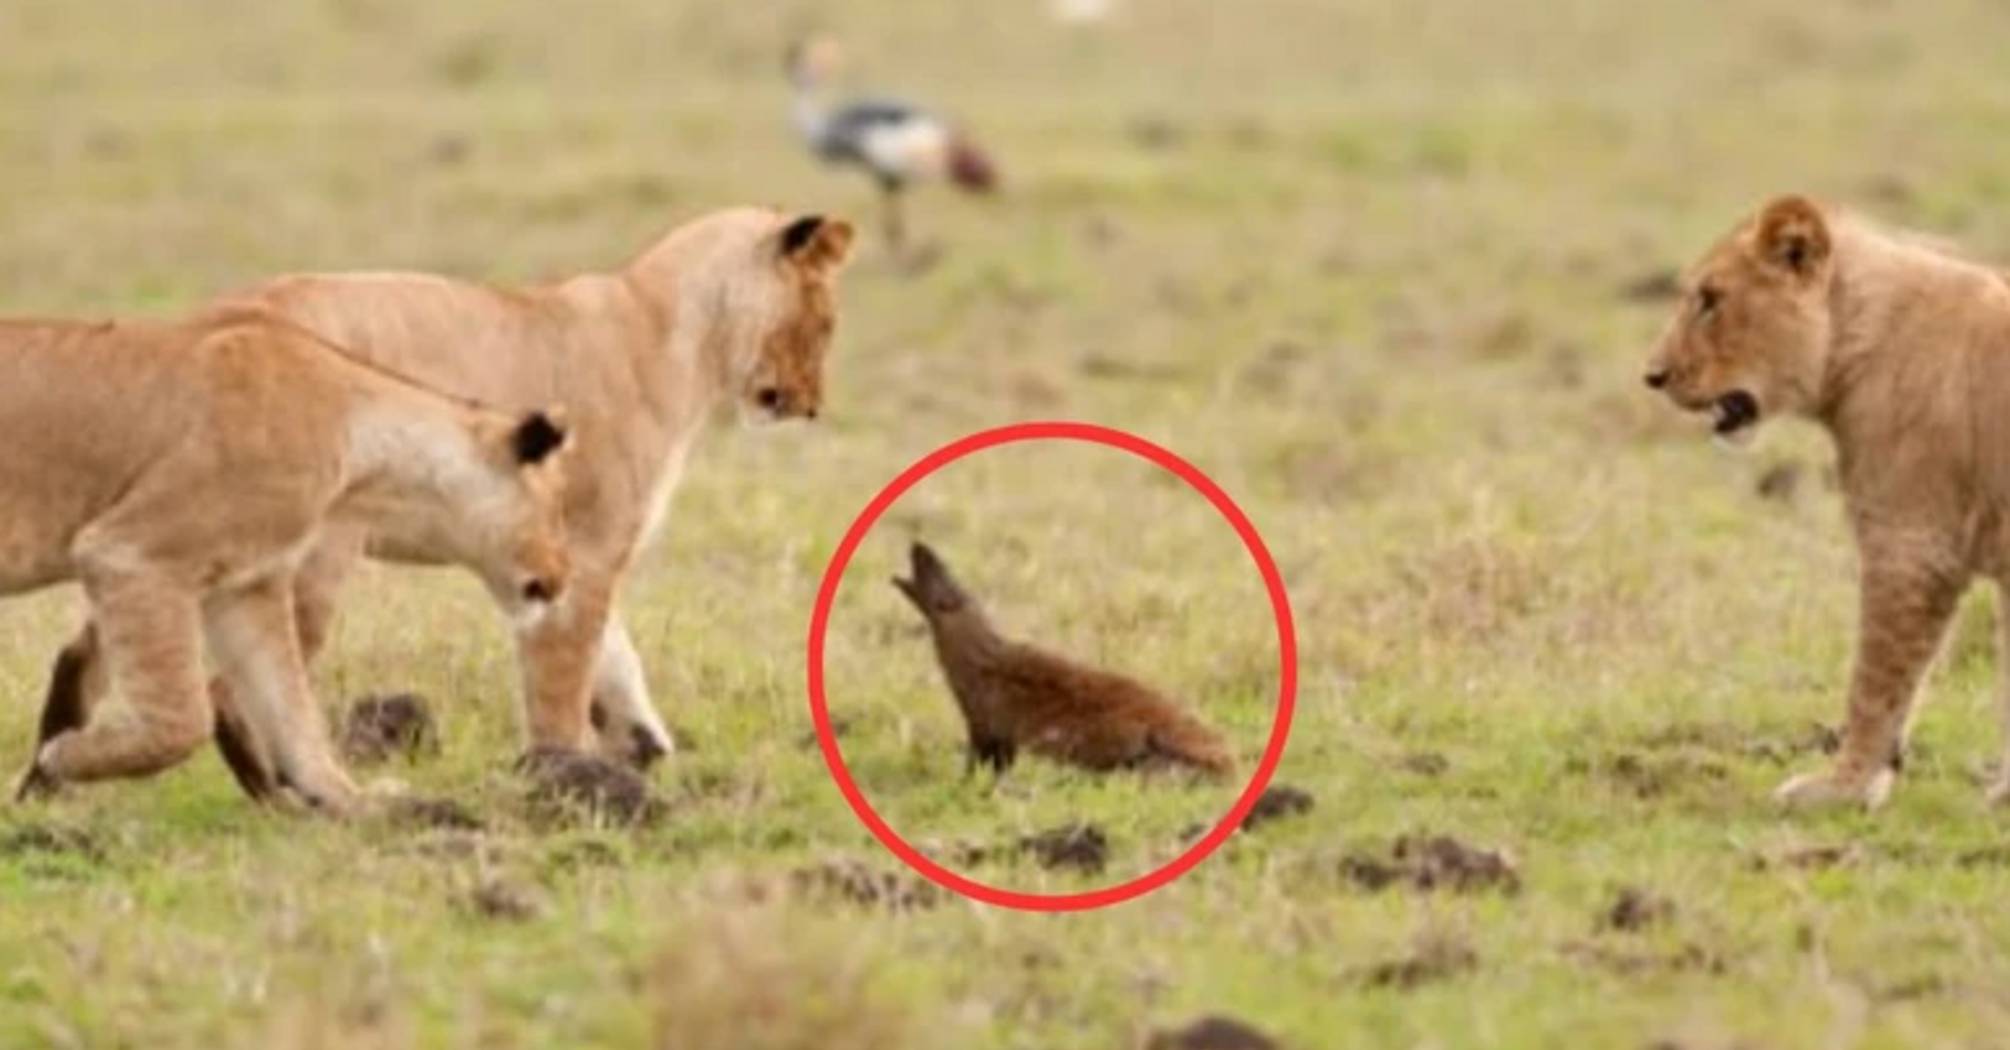 Brave mongoose fearlessly confronts majestic lions